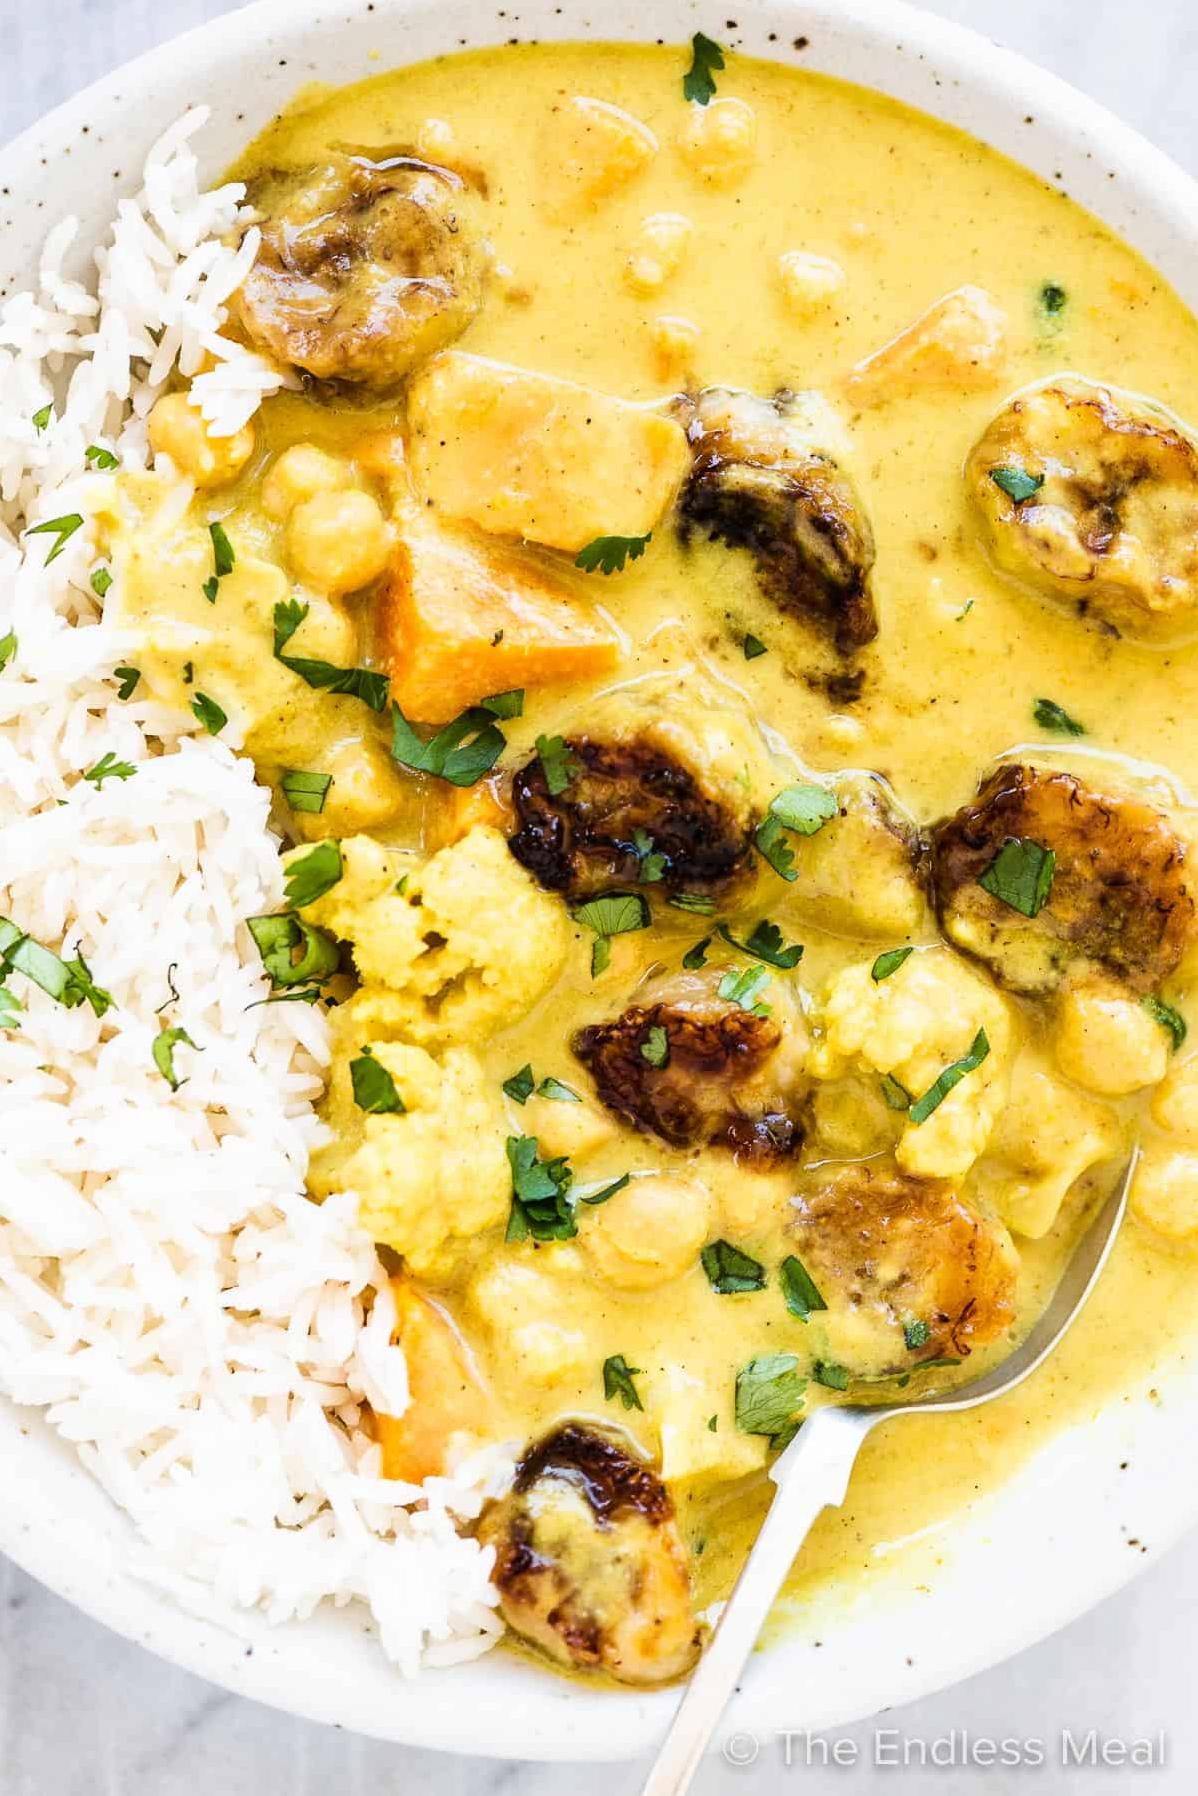  Beautifully ripe bananas give this curry a subtly sweet flavor